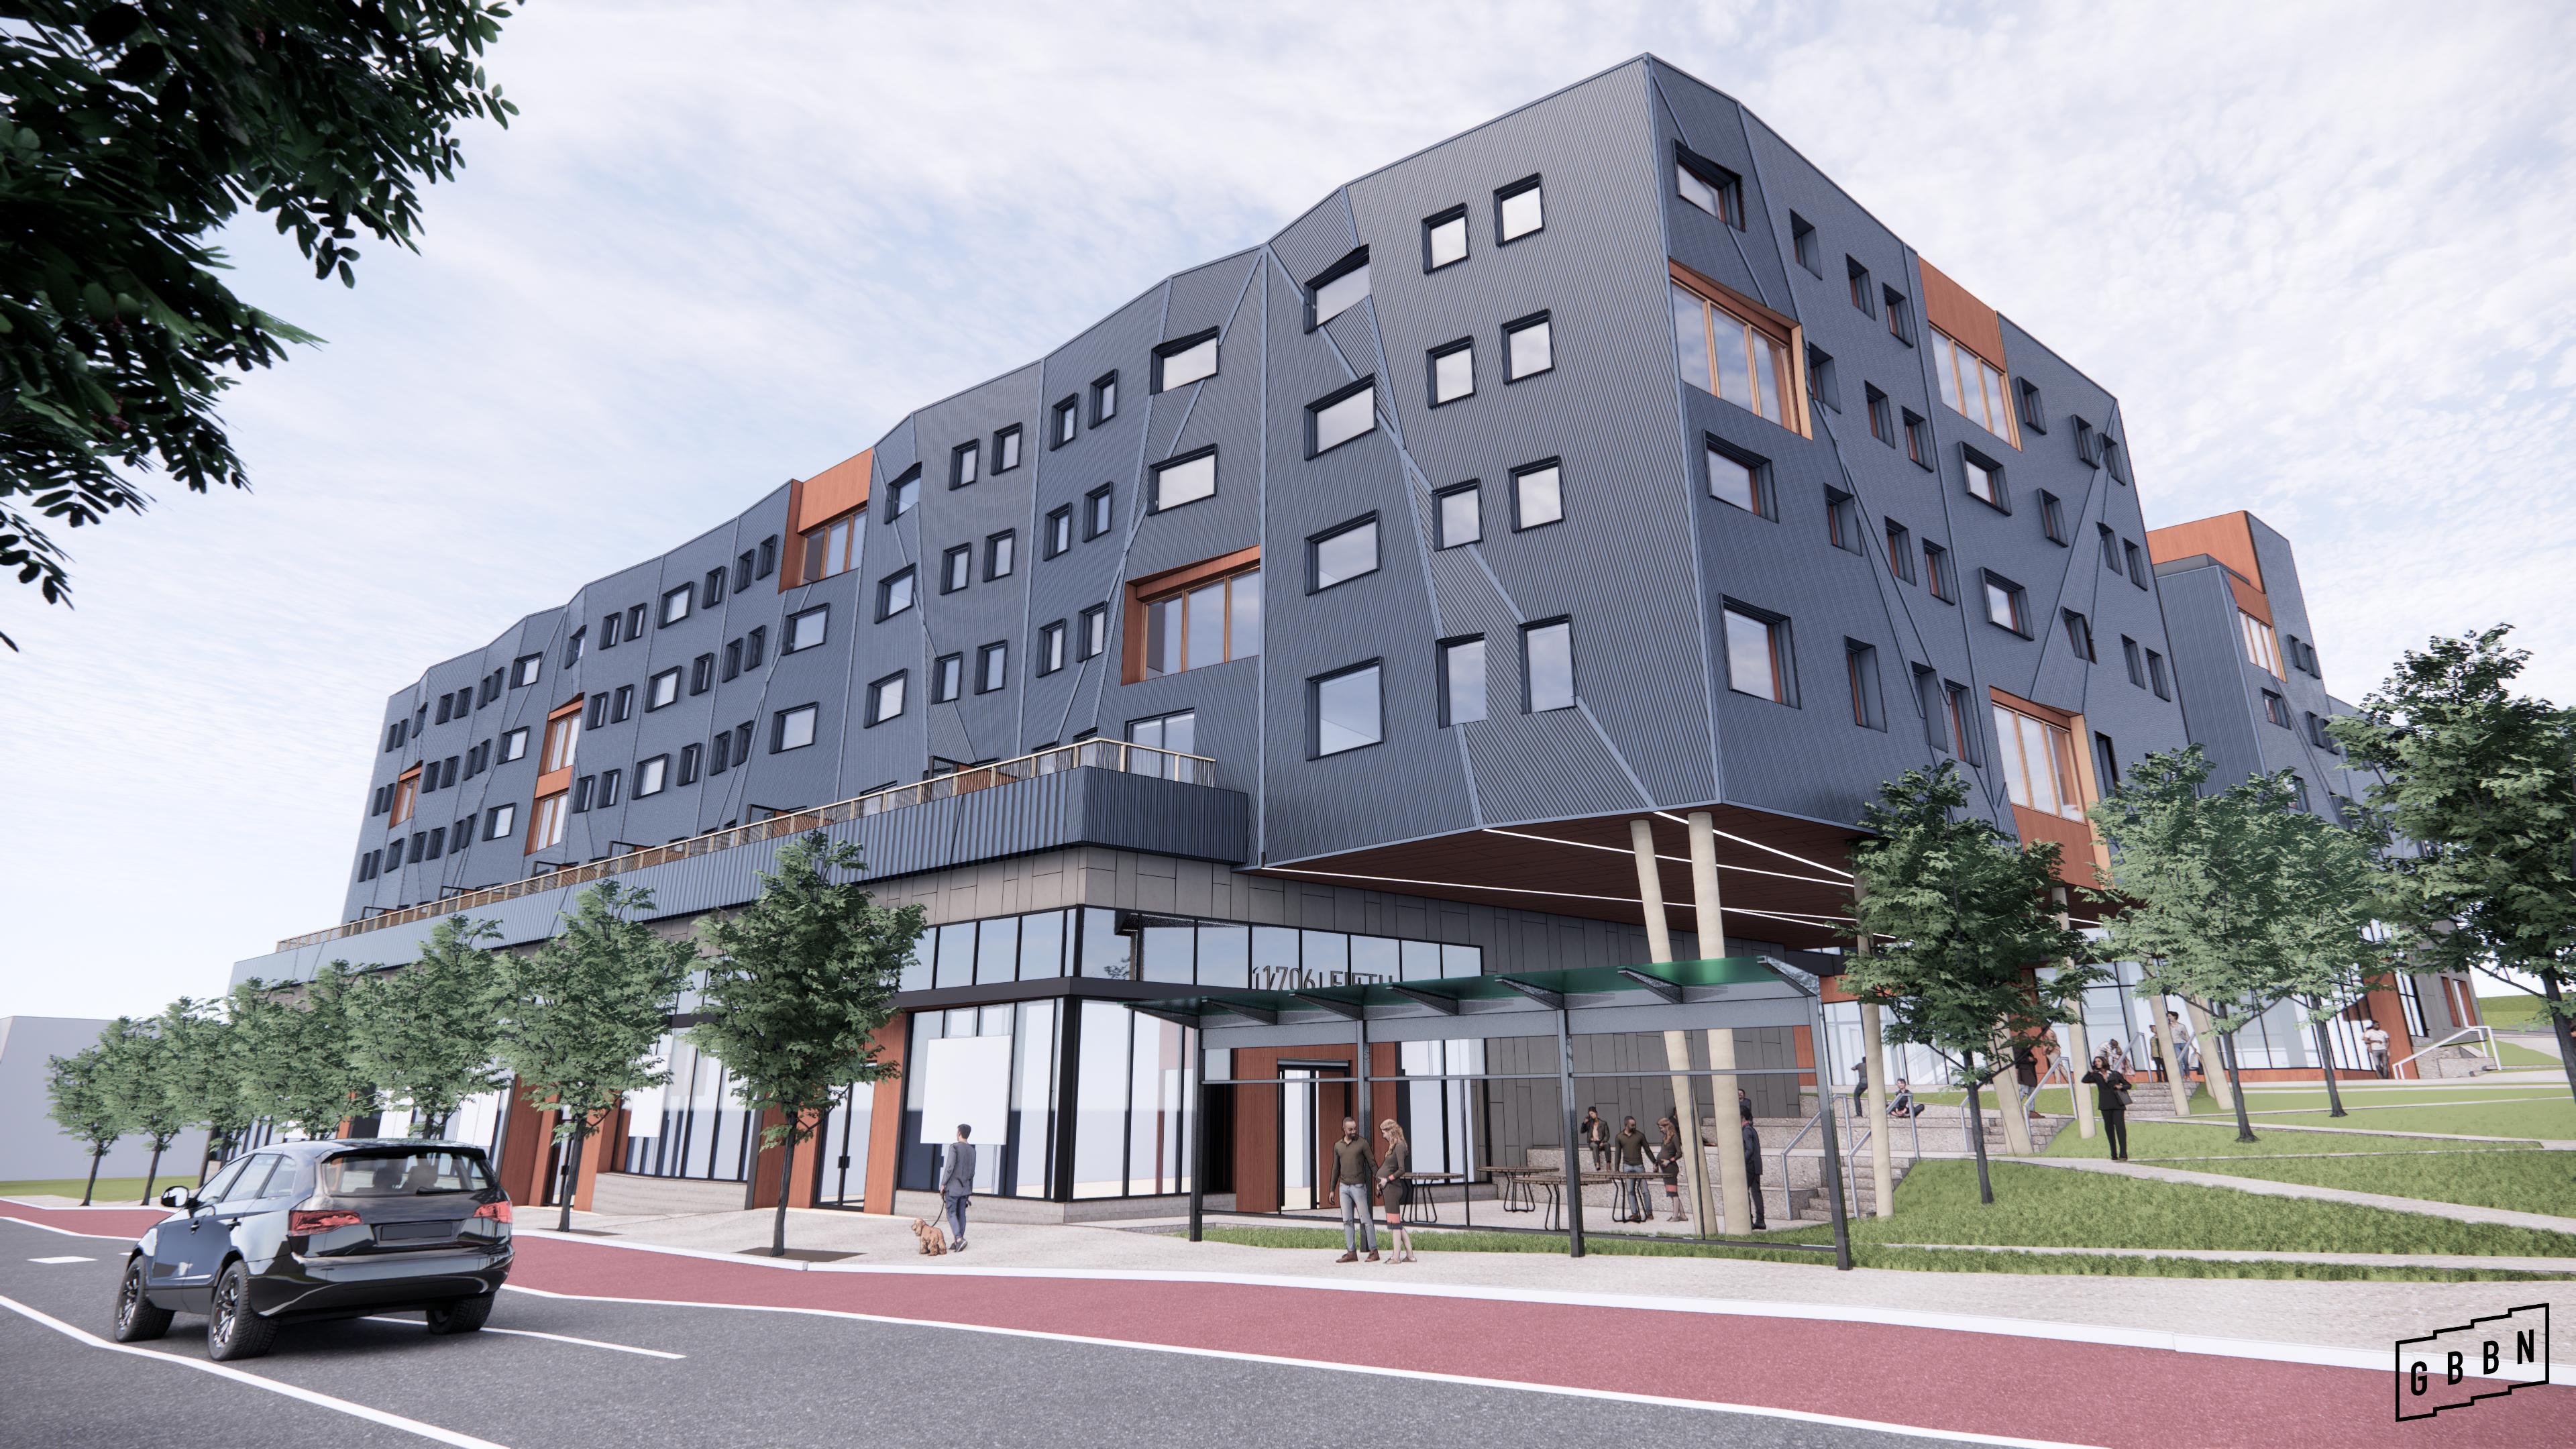 A rendering of Fifth & Dinwiddie West, which will feature ground-floor retail, office space, and 171 mixed-income housing units.